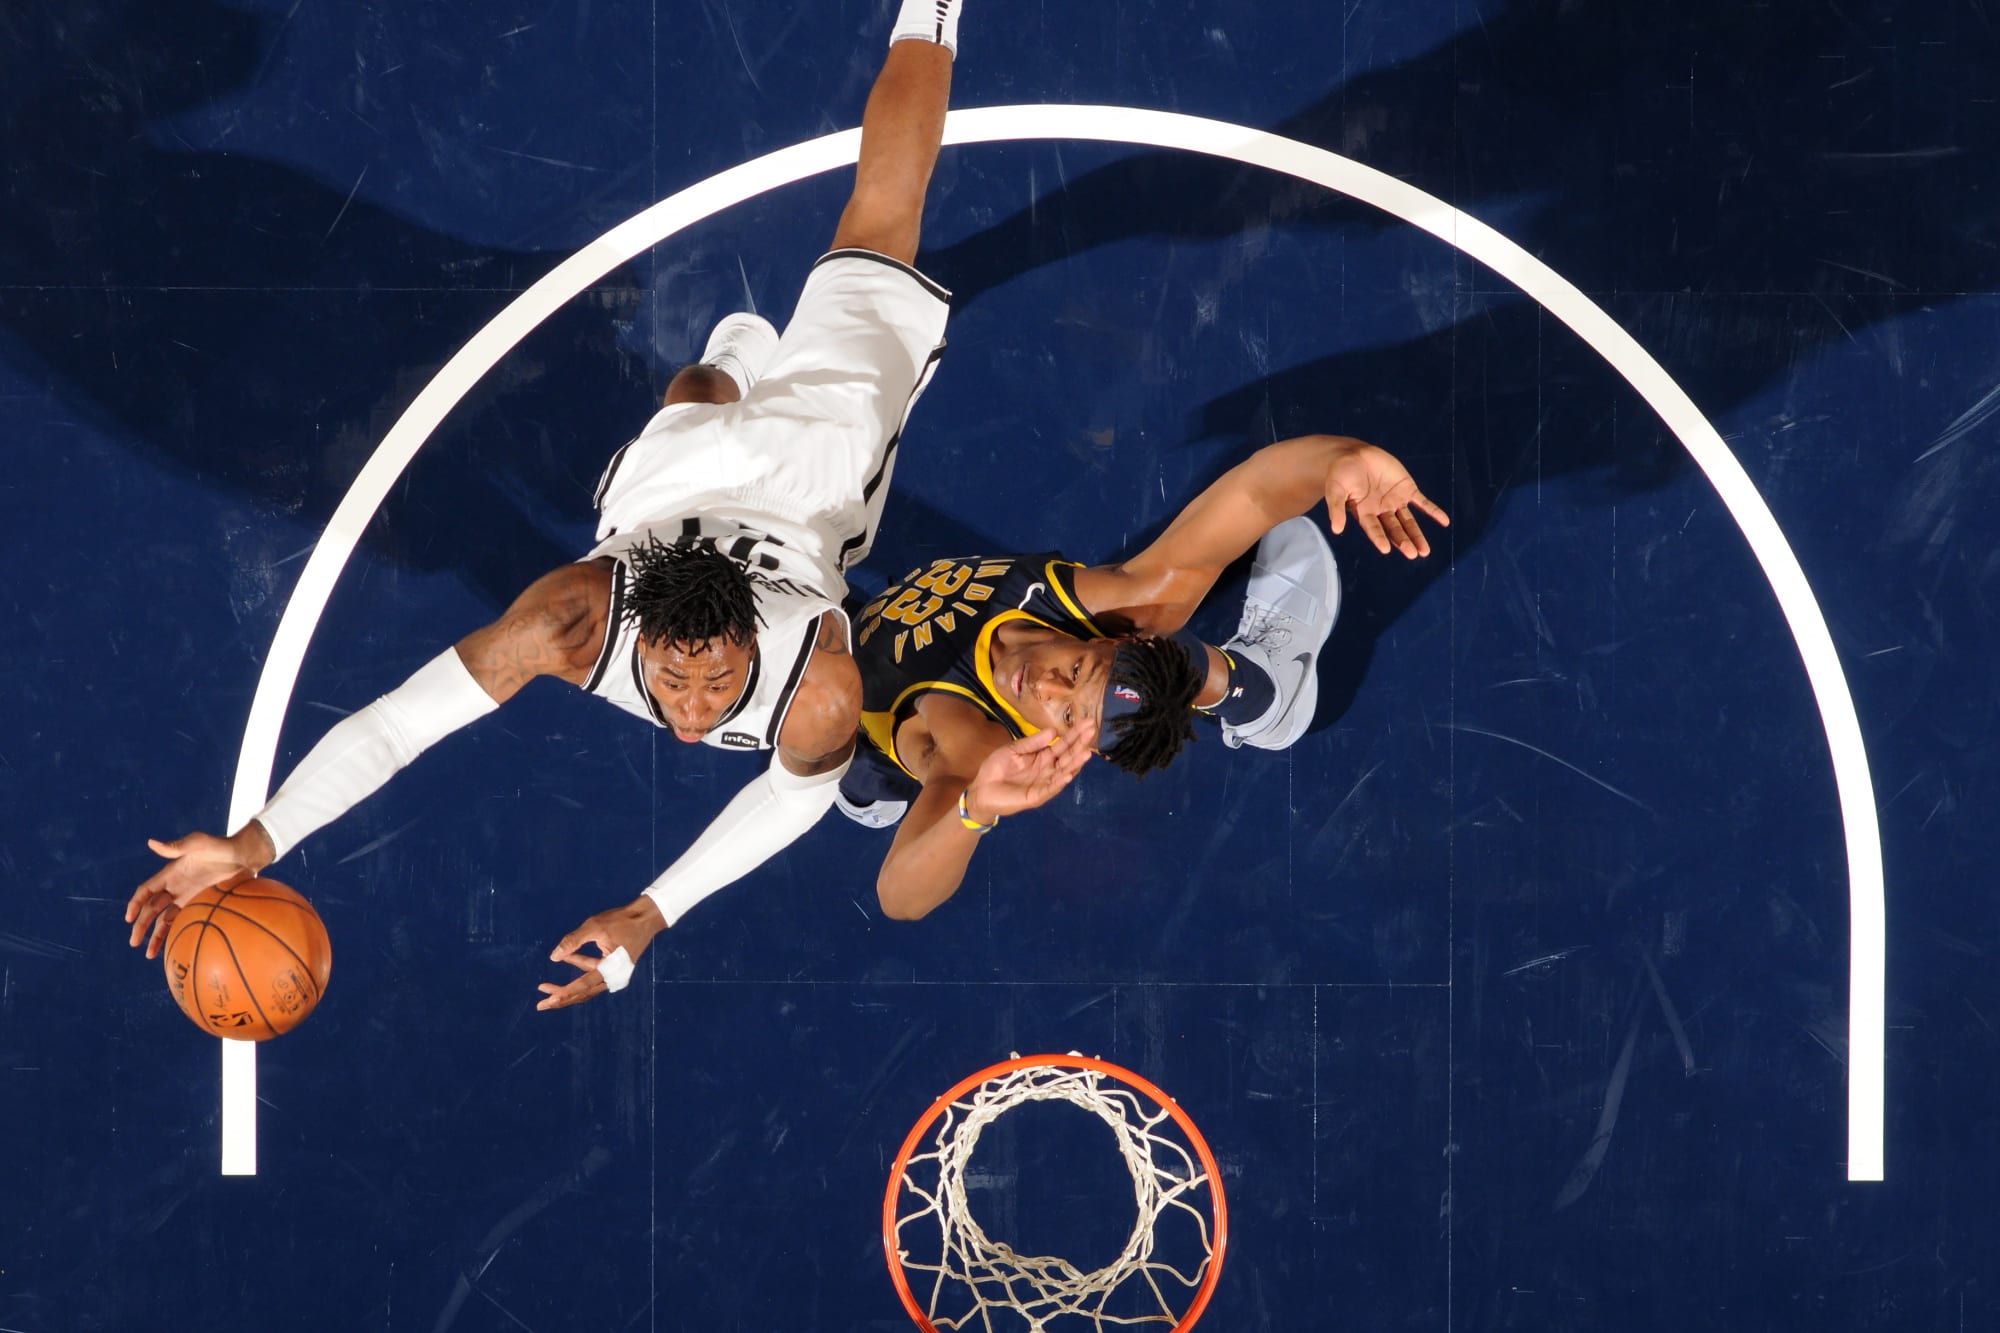 Myles Turner is back, meaning the Indiana Pacers have decisions to make